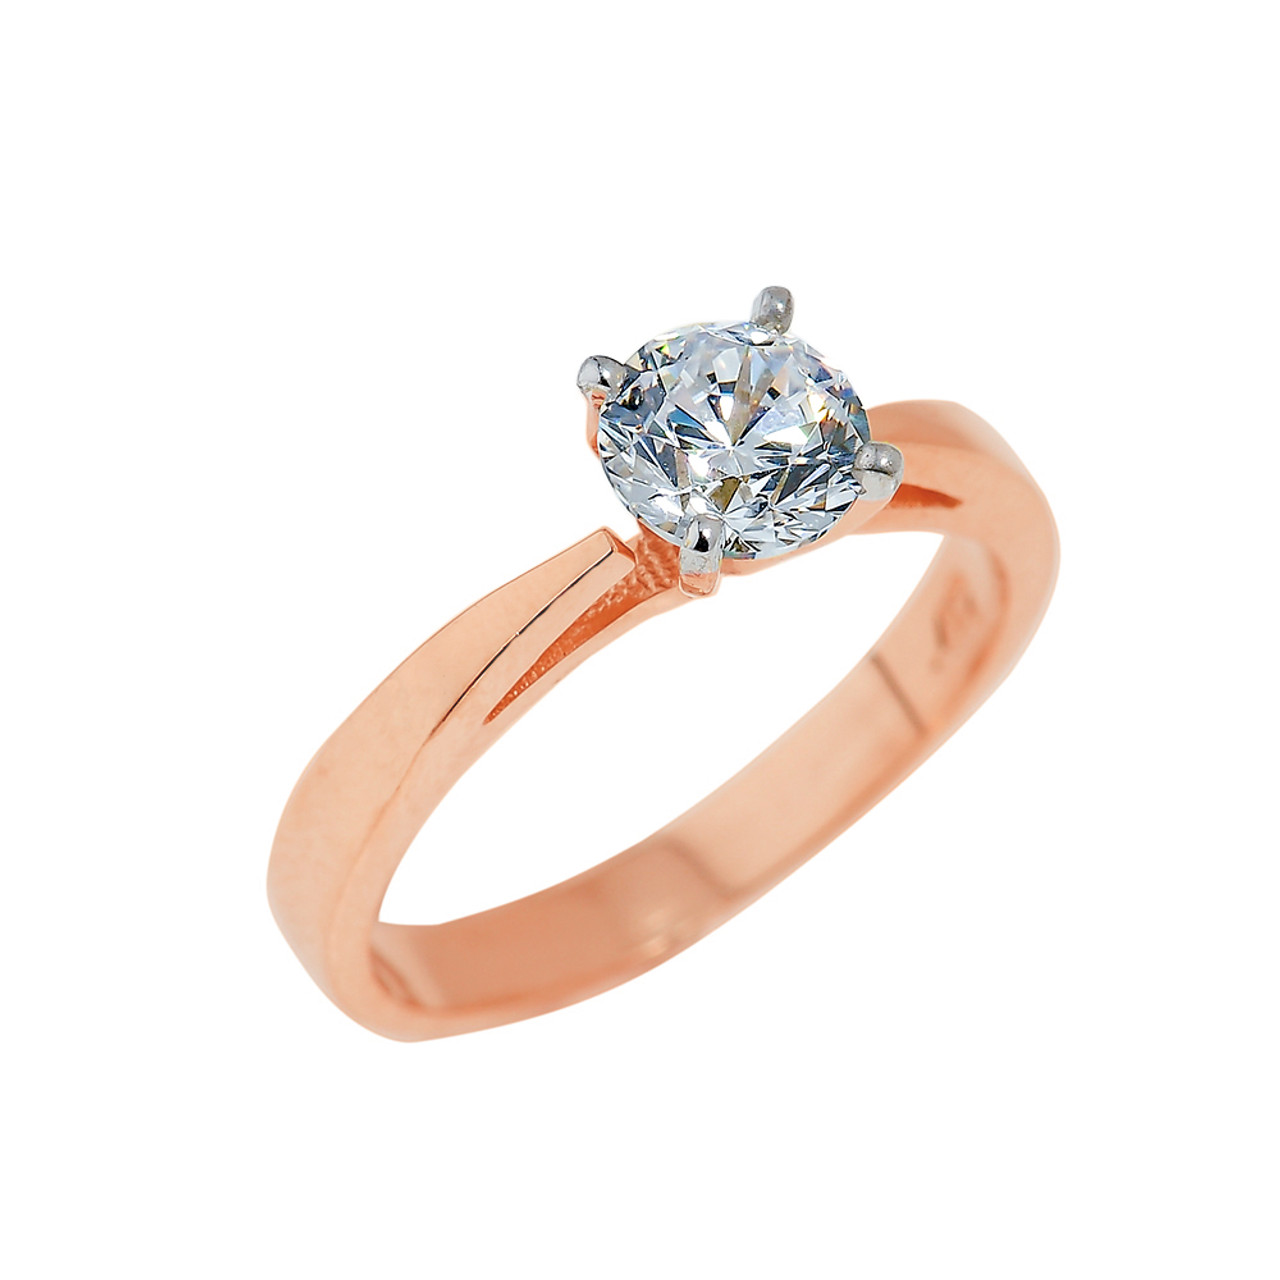  Rose  Gold  Engagement  Ring  with Round Cut CZ  Engagement  Rings 